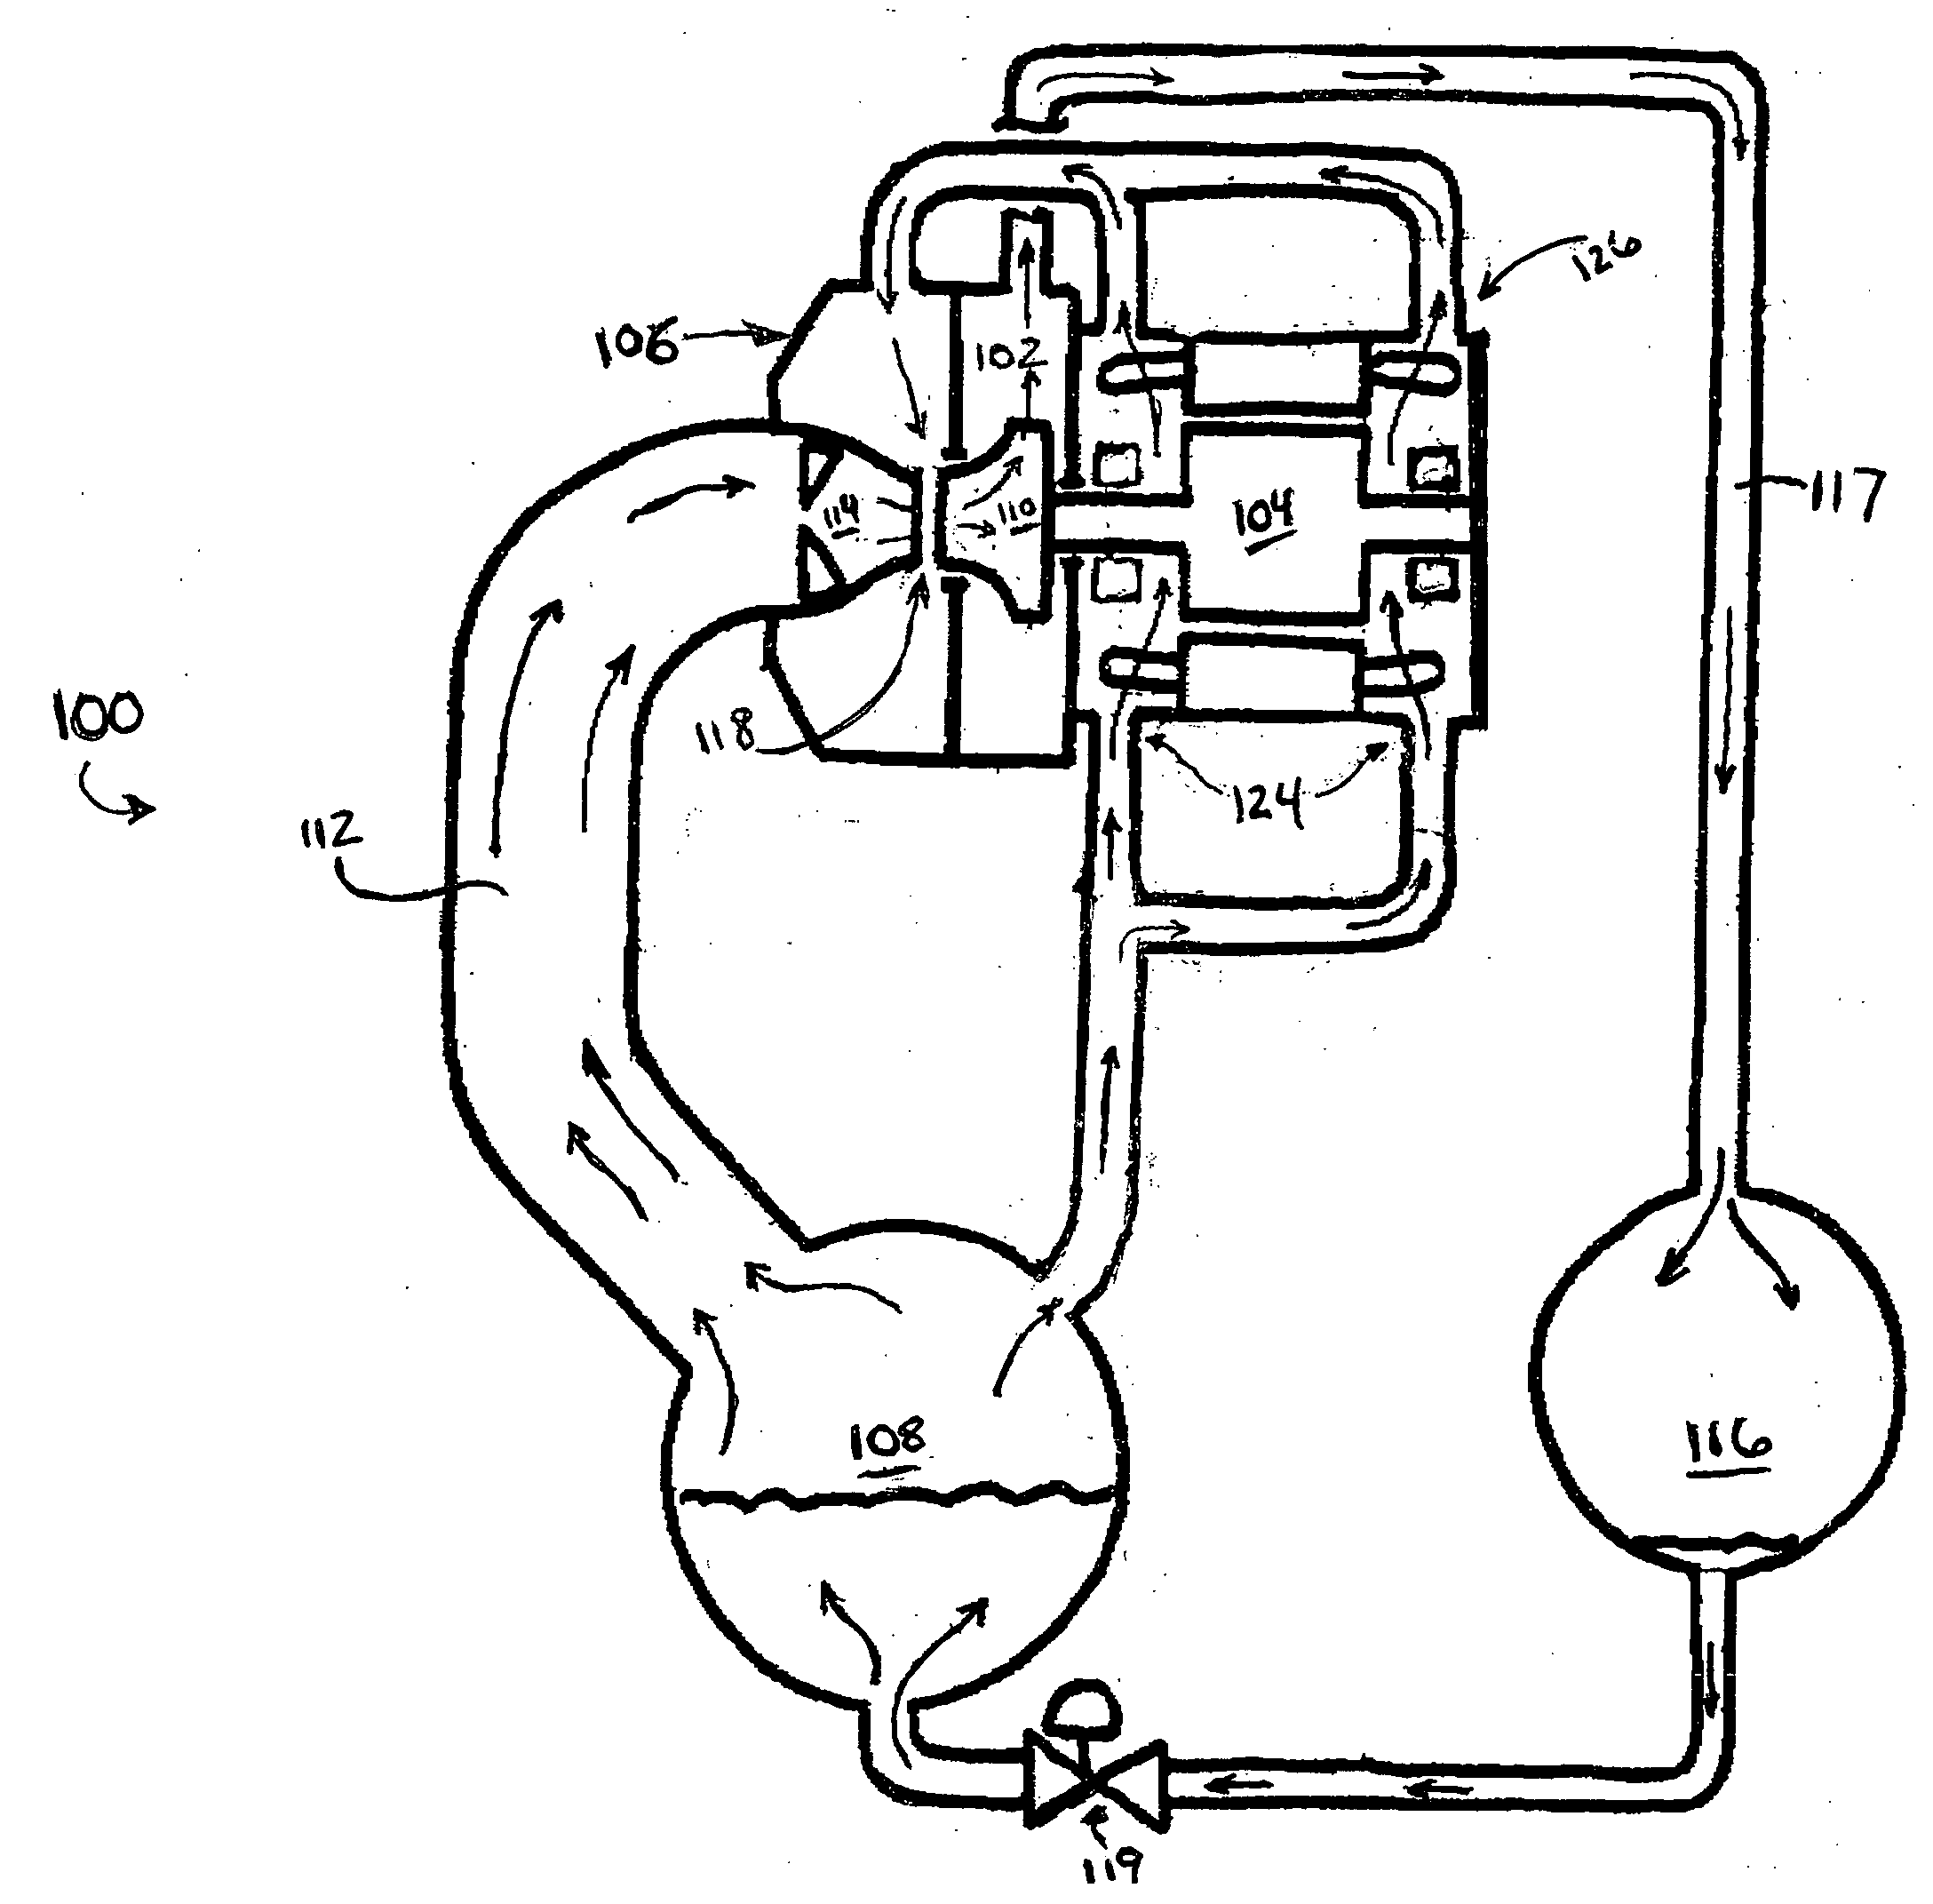 System and method for cooling a compressor motor